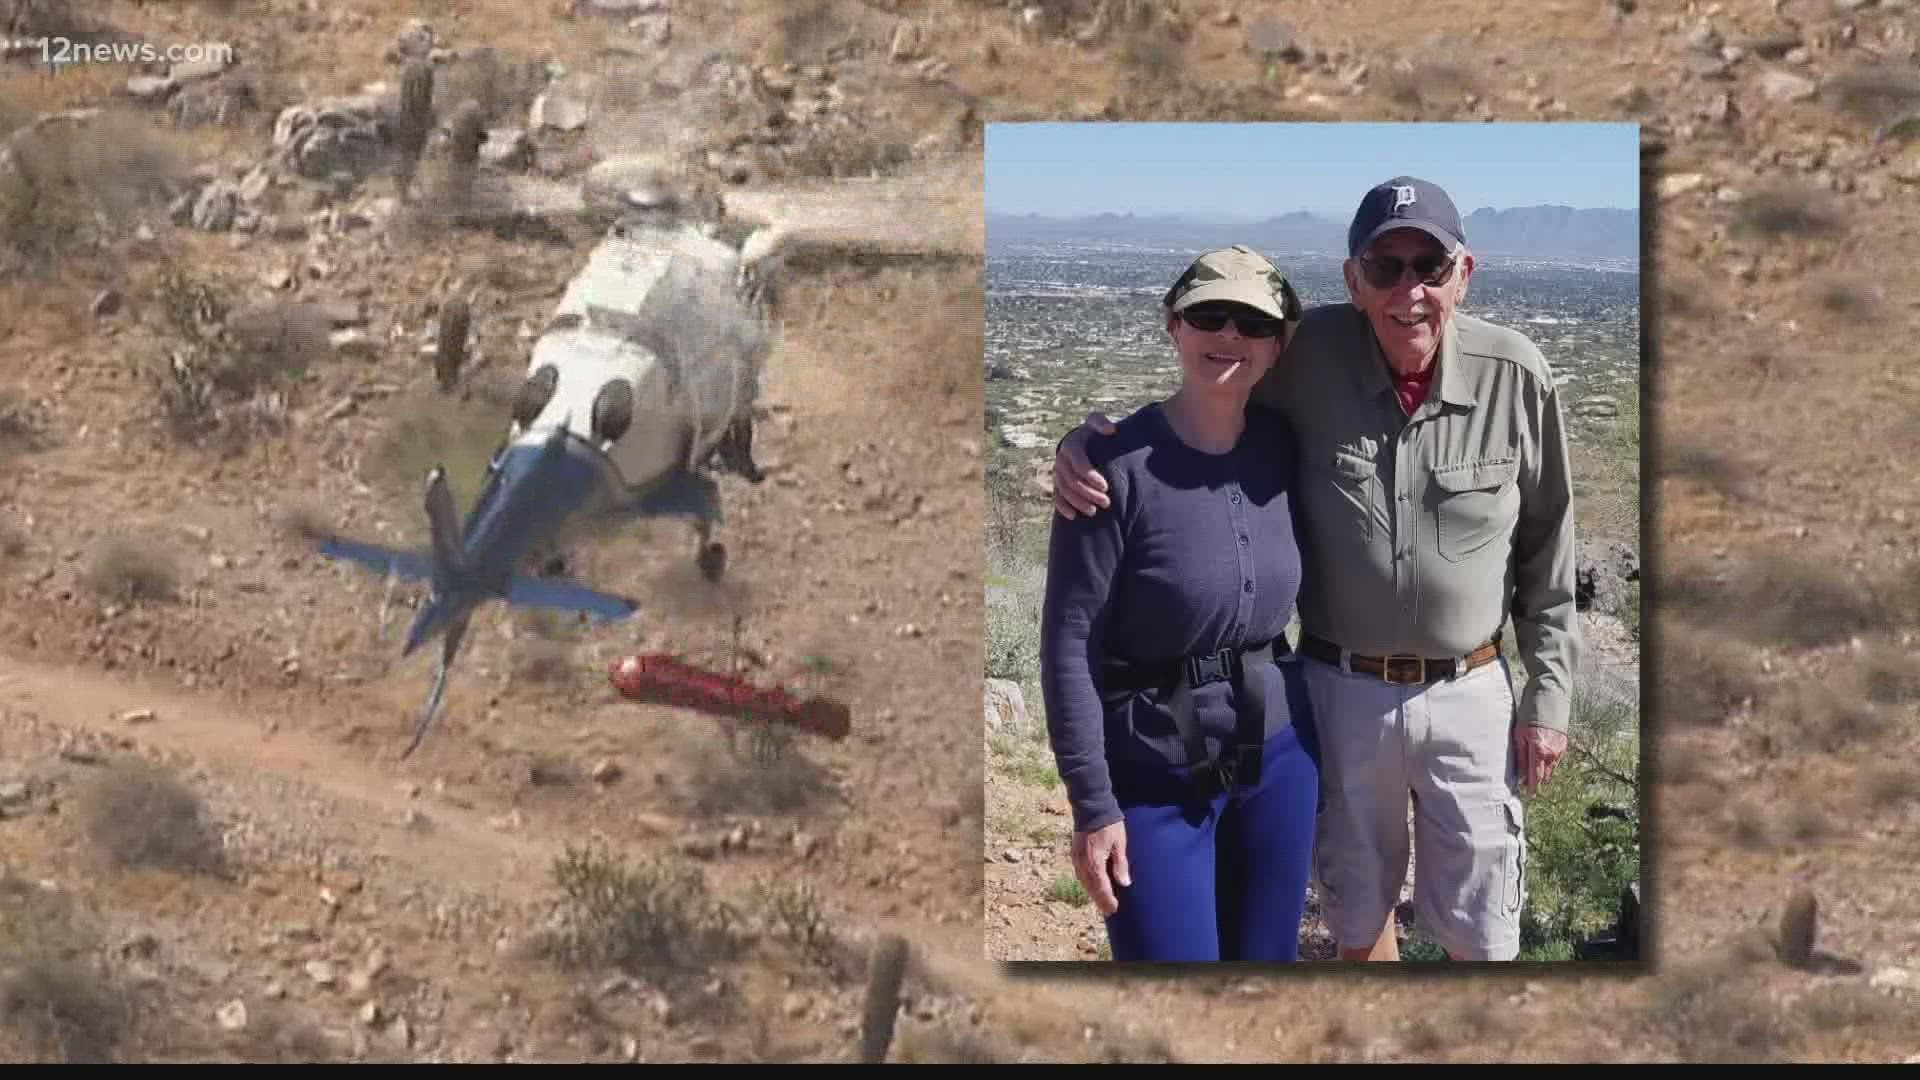 The Phoenix City Council unanimously approved a $450,000 legal settlement Wednesday for a woman who was injured in a helicopter rescue that spun out of control.